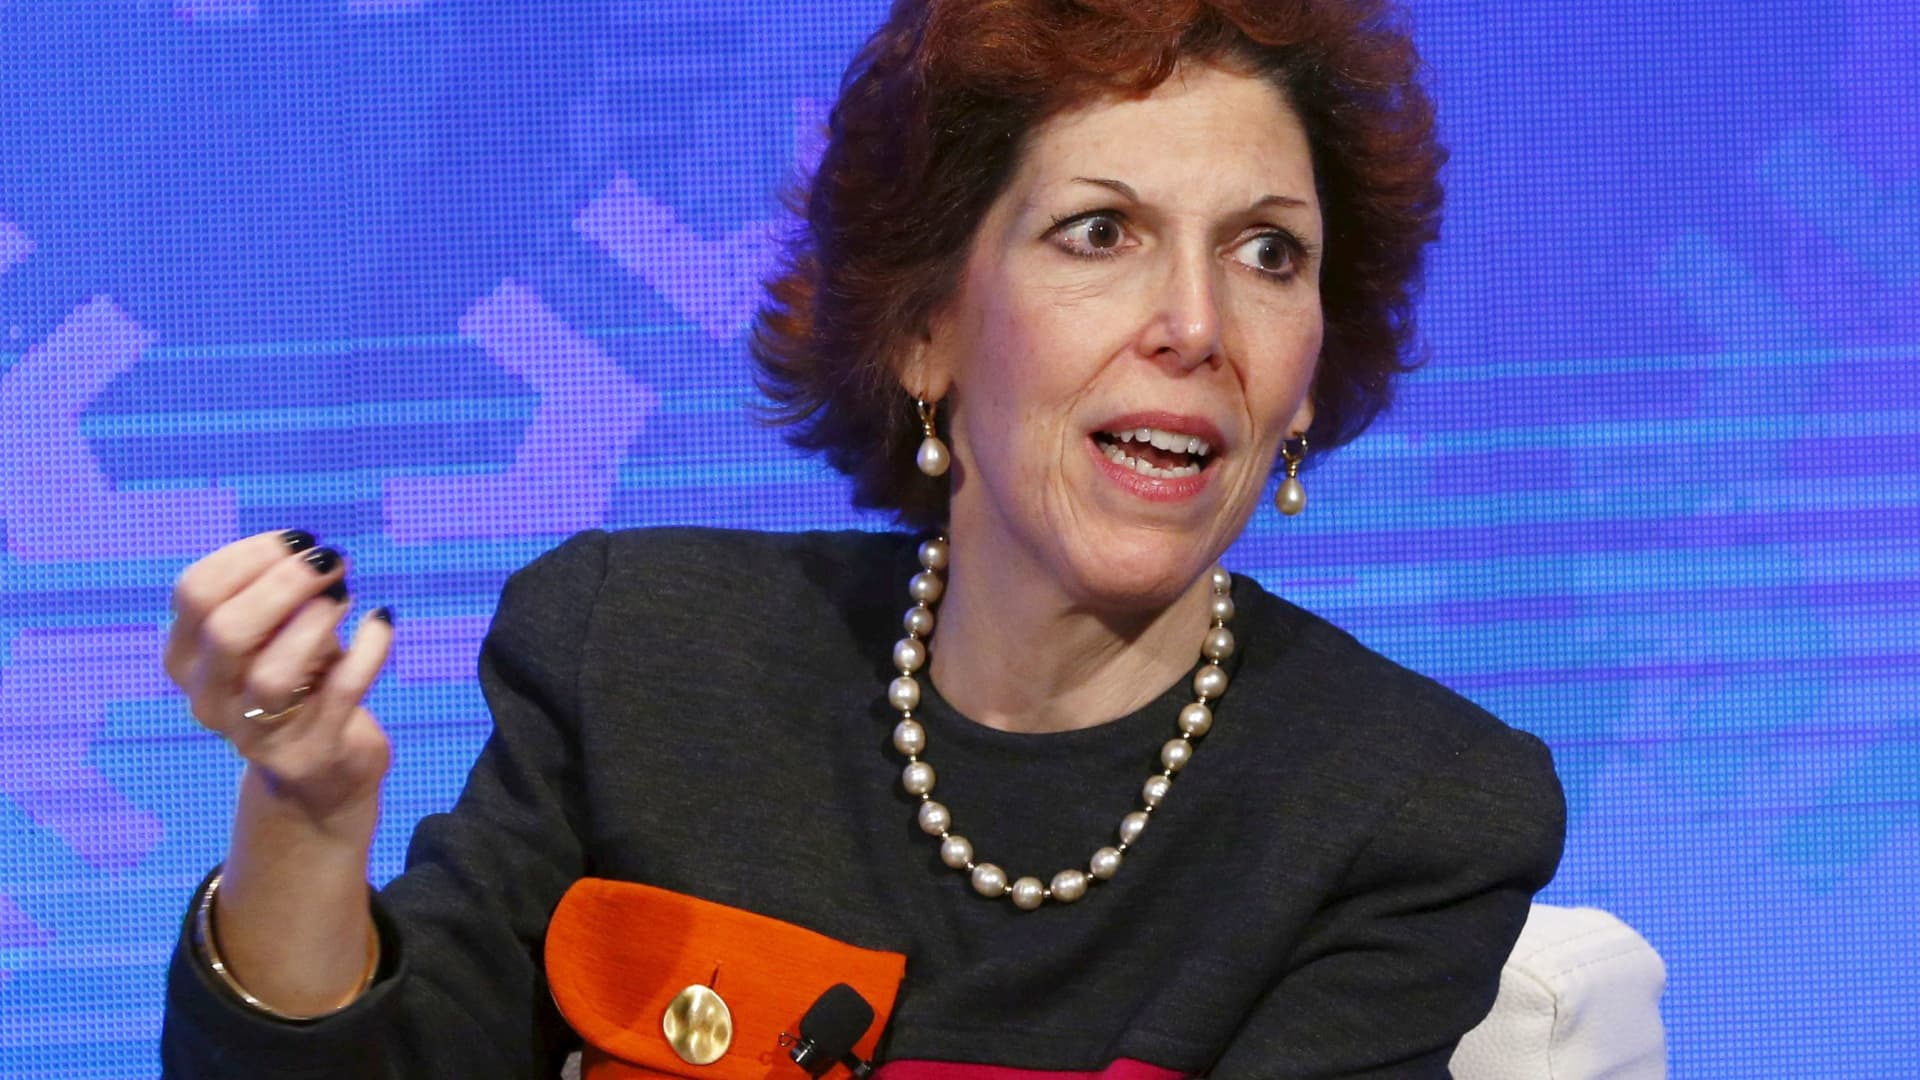 Fed’s Mester backs 75 basis point hike in July if conditions remain the same